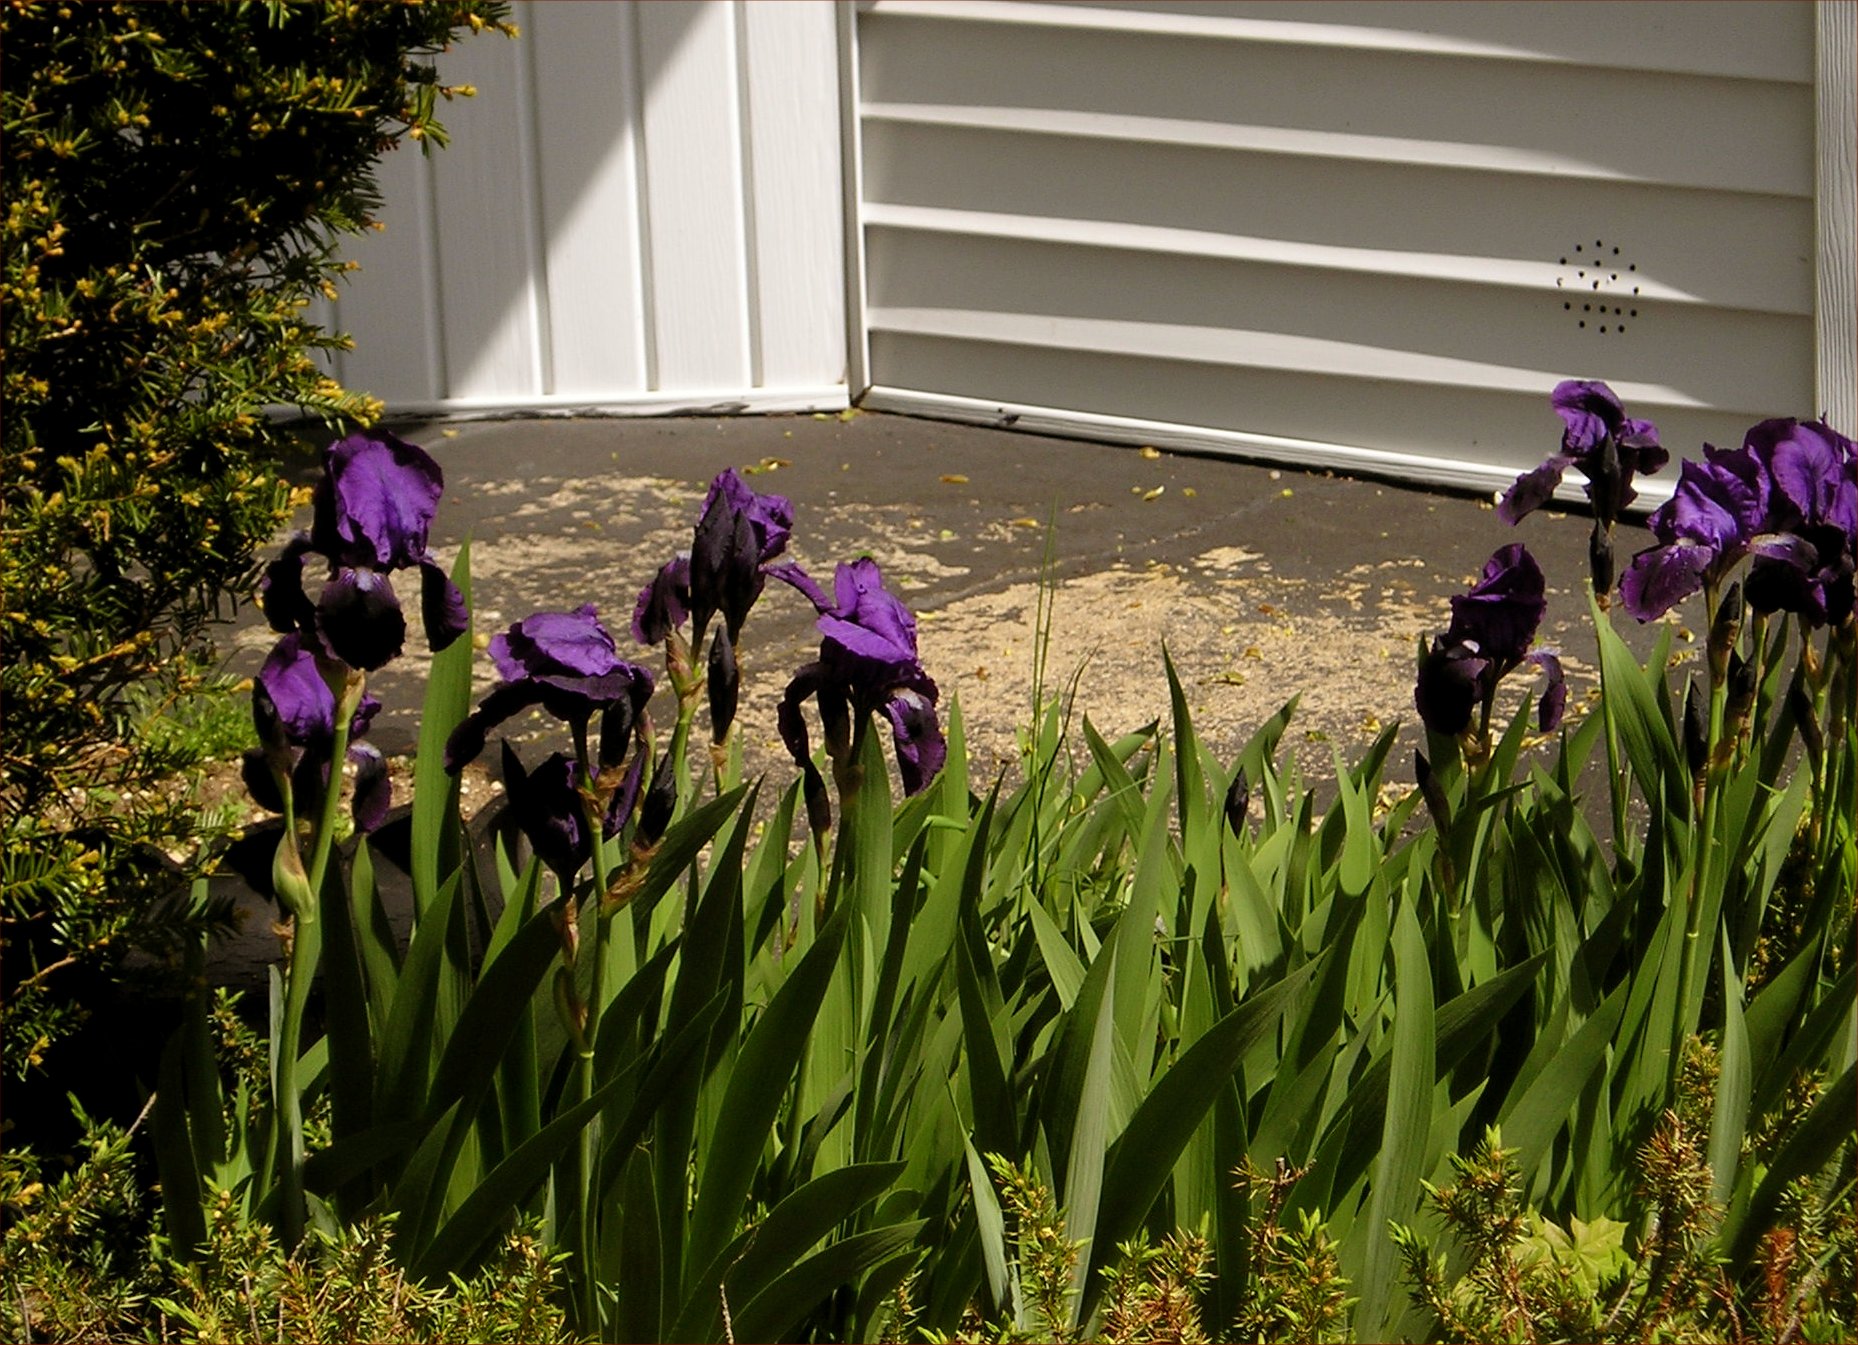 Irises on our front porch